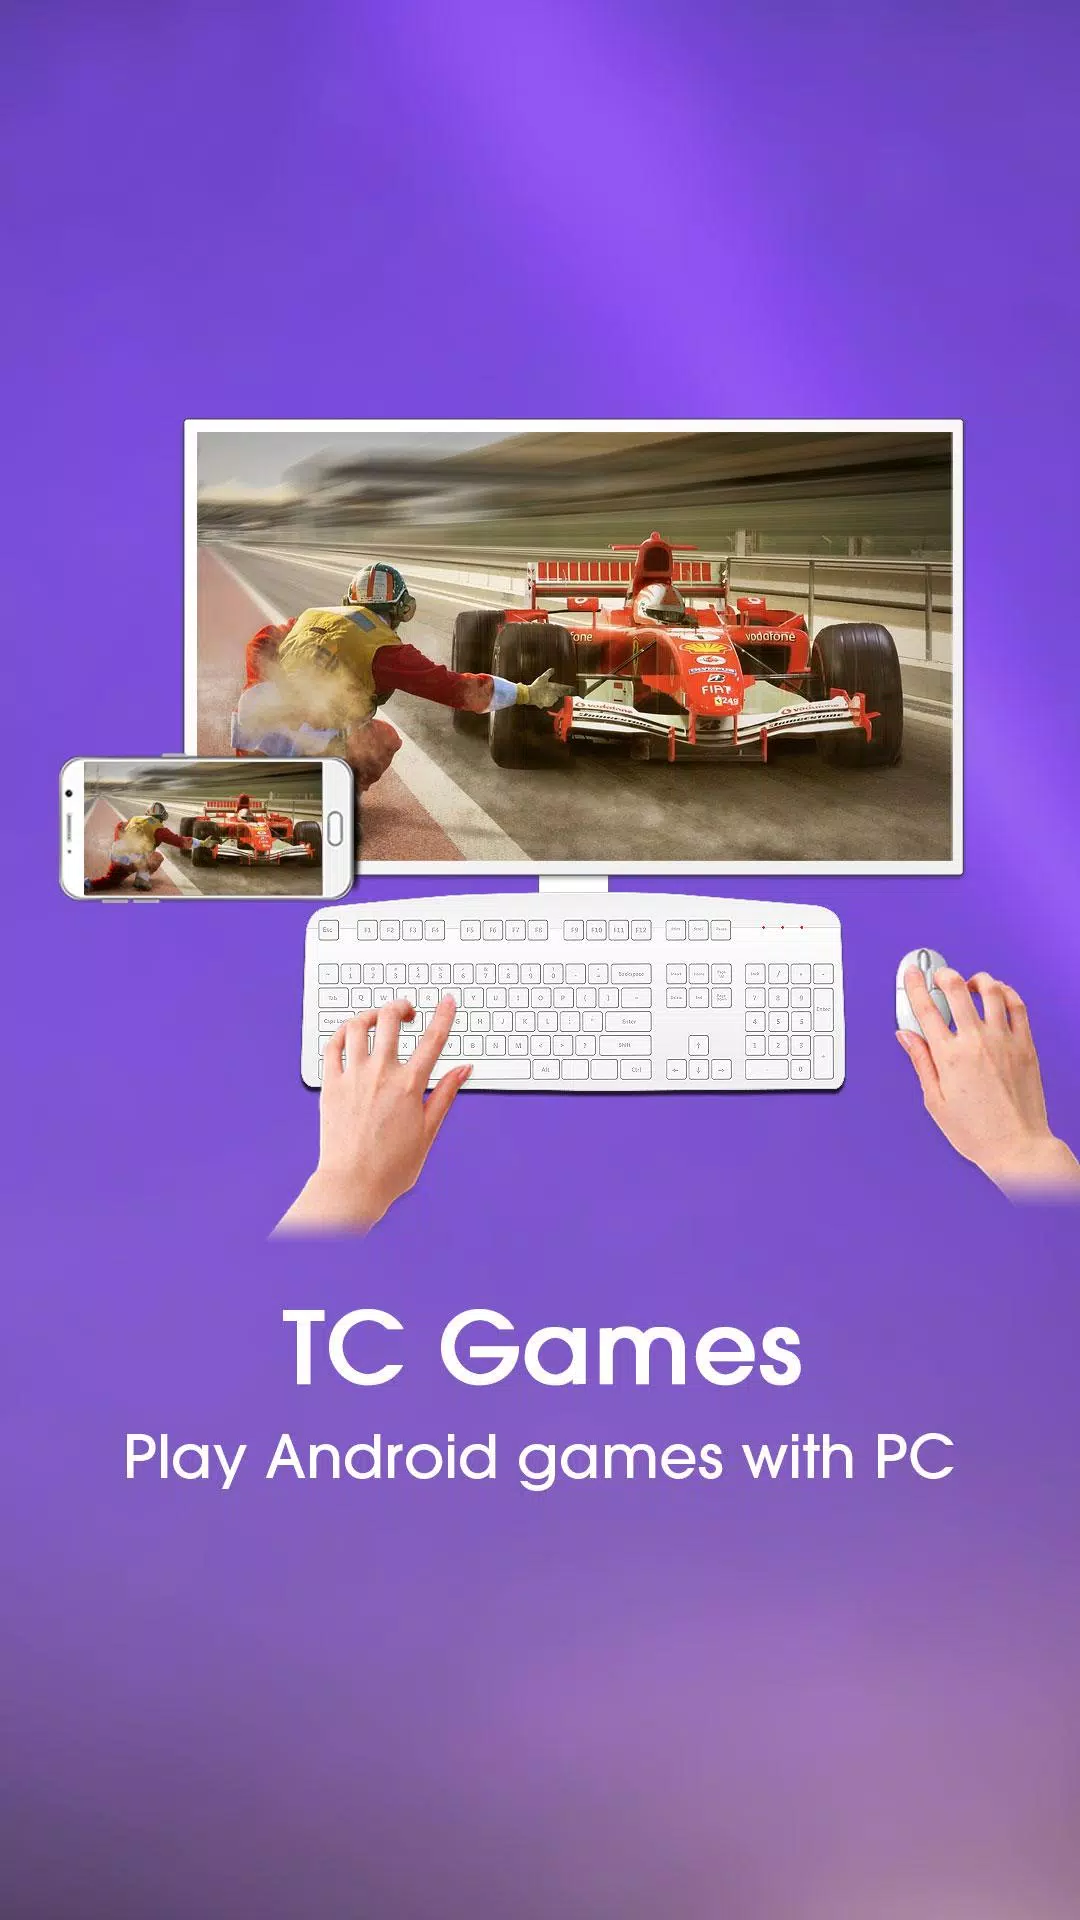 TC Games 3.0 Update 3512708 Free Download for Windows 10, 8 and 7 